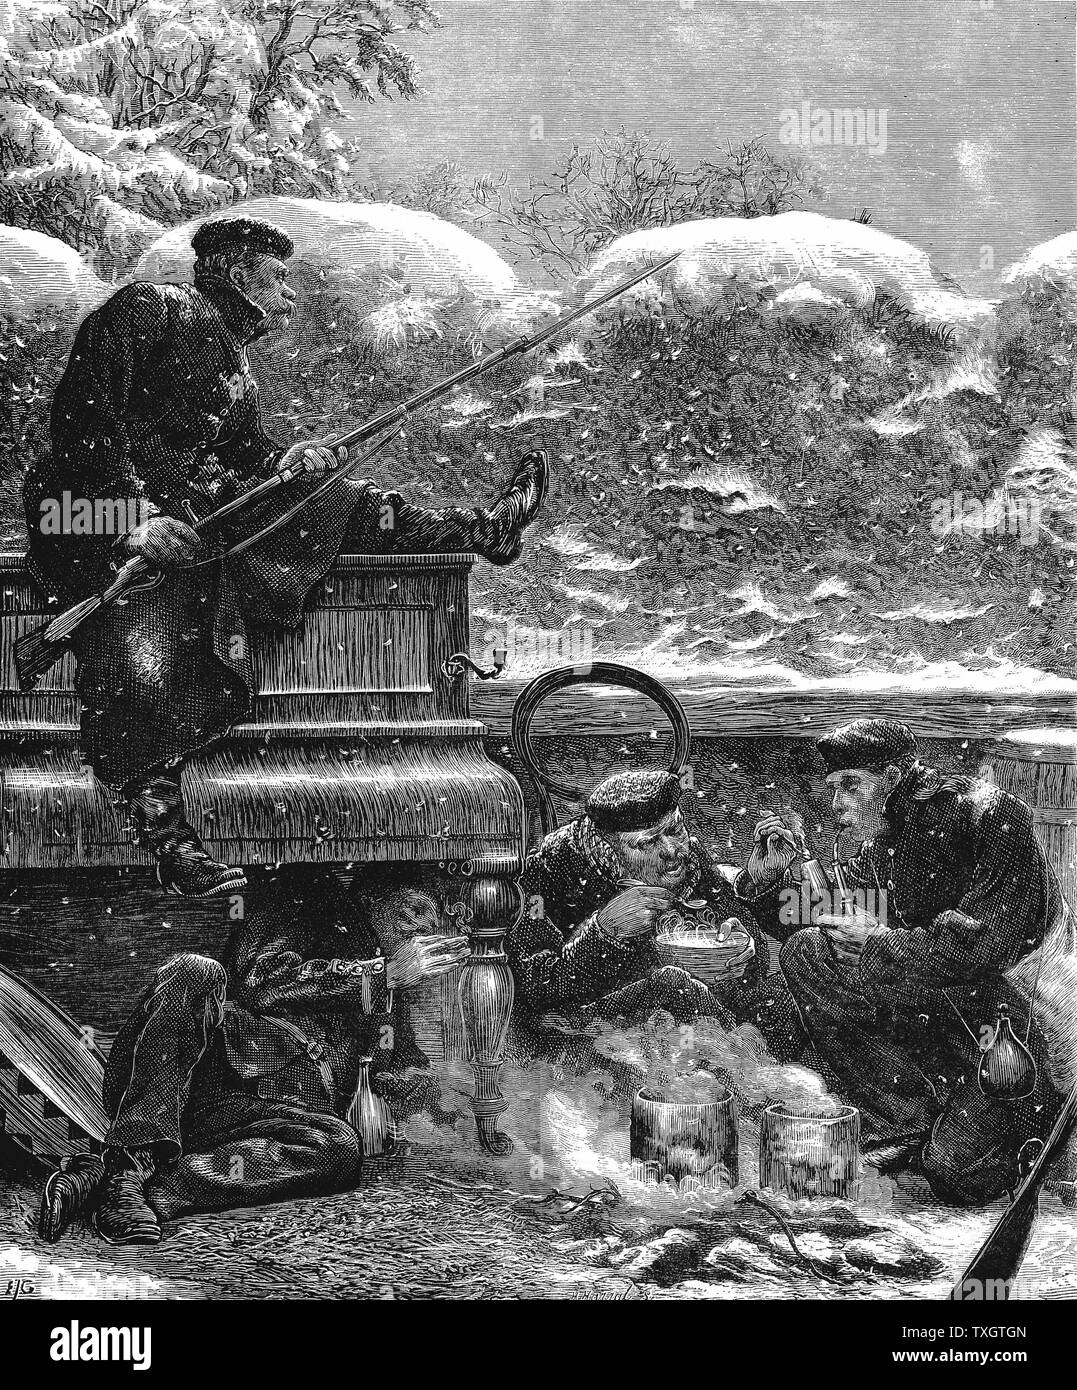 Franco-Prussian War 1870-1871: Prussian troops before Paris waiting for the sortie. One rifleman, bayonet fixed, keeps watch while his companions enjoy a meal and a smoke 17 December 1870   Wood engraving Stock Photo